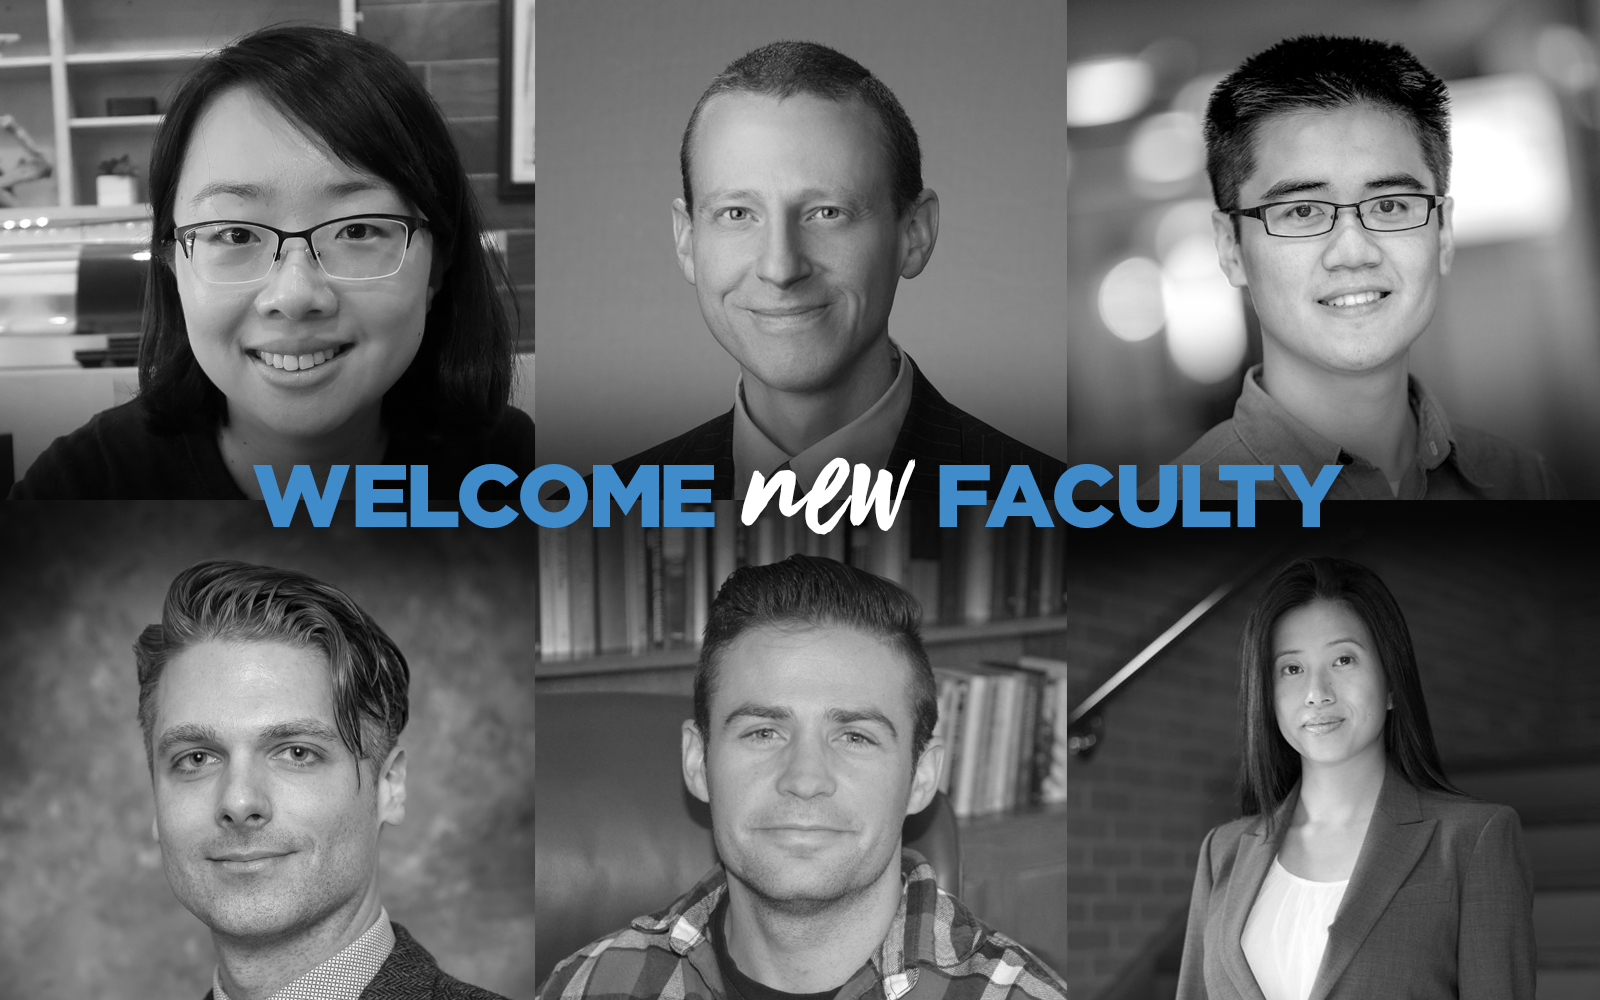 COmposite Image of new faculty members, with a welcome message in the middle